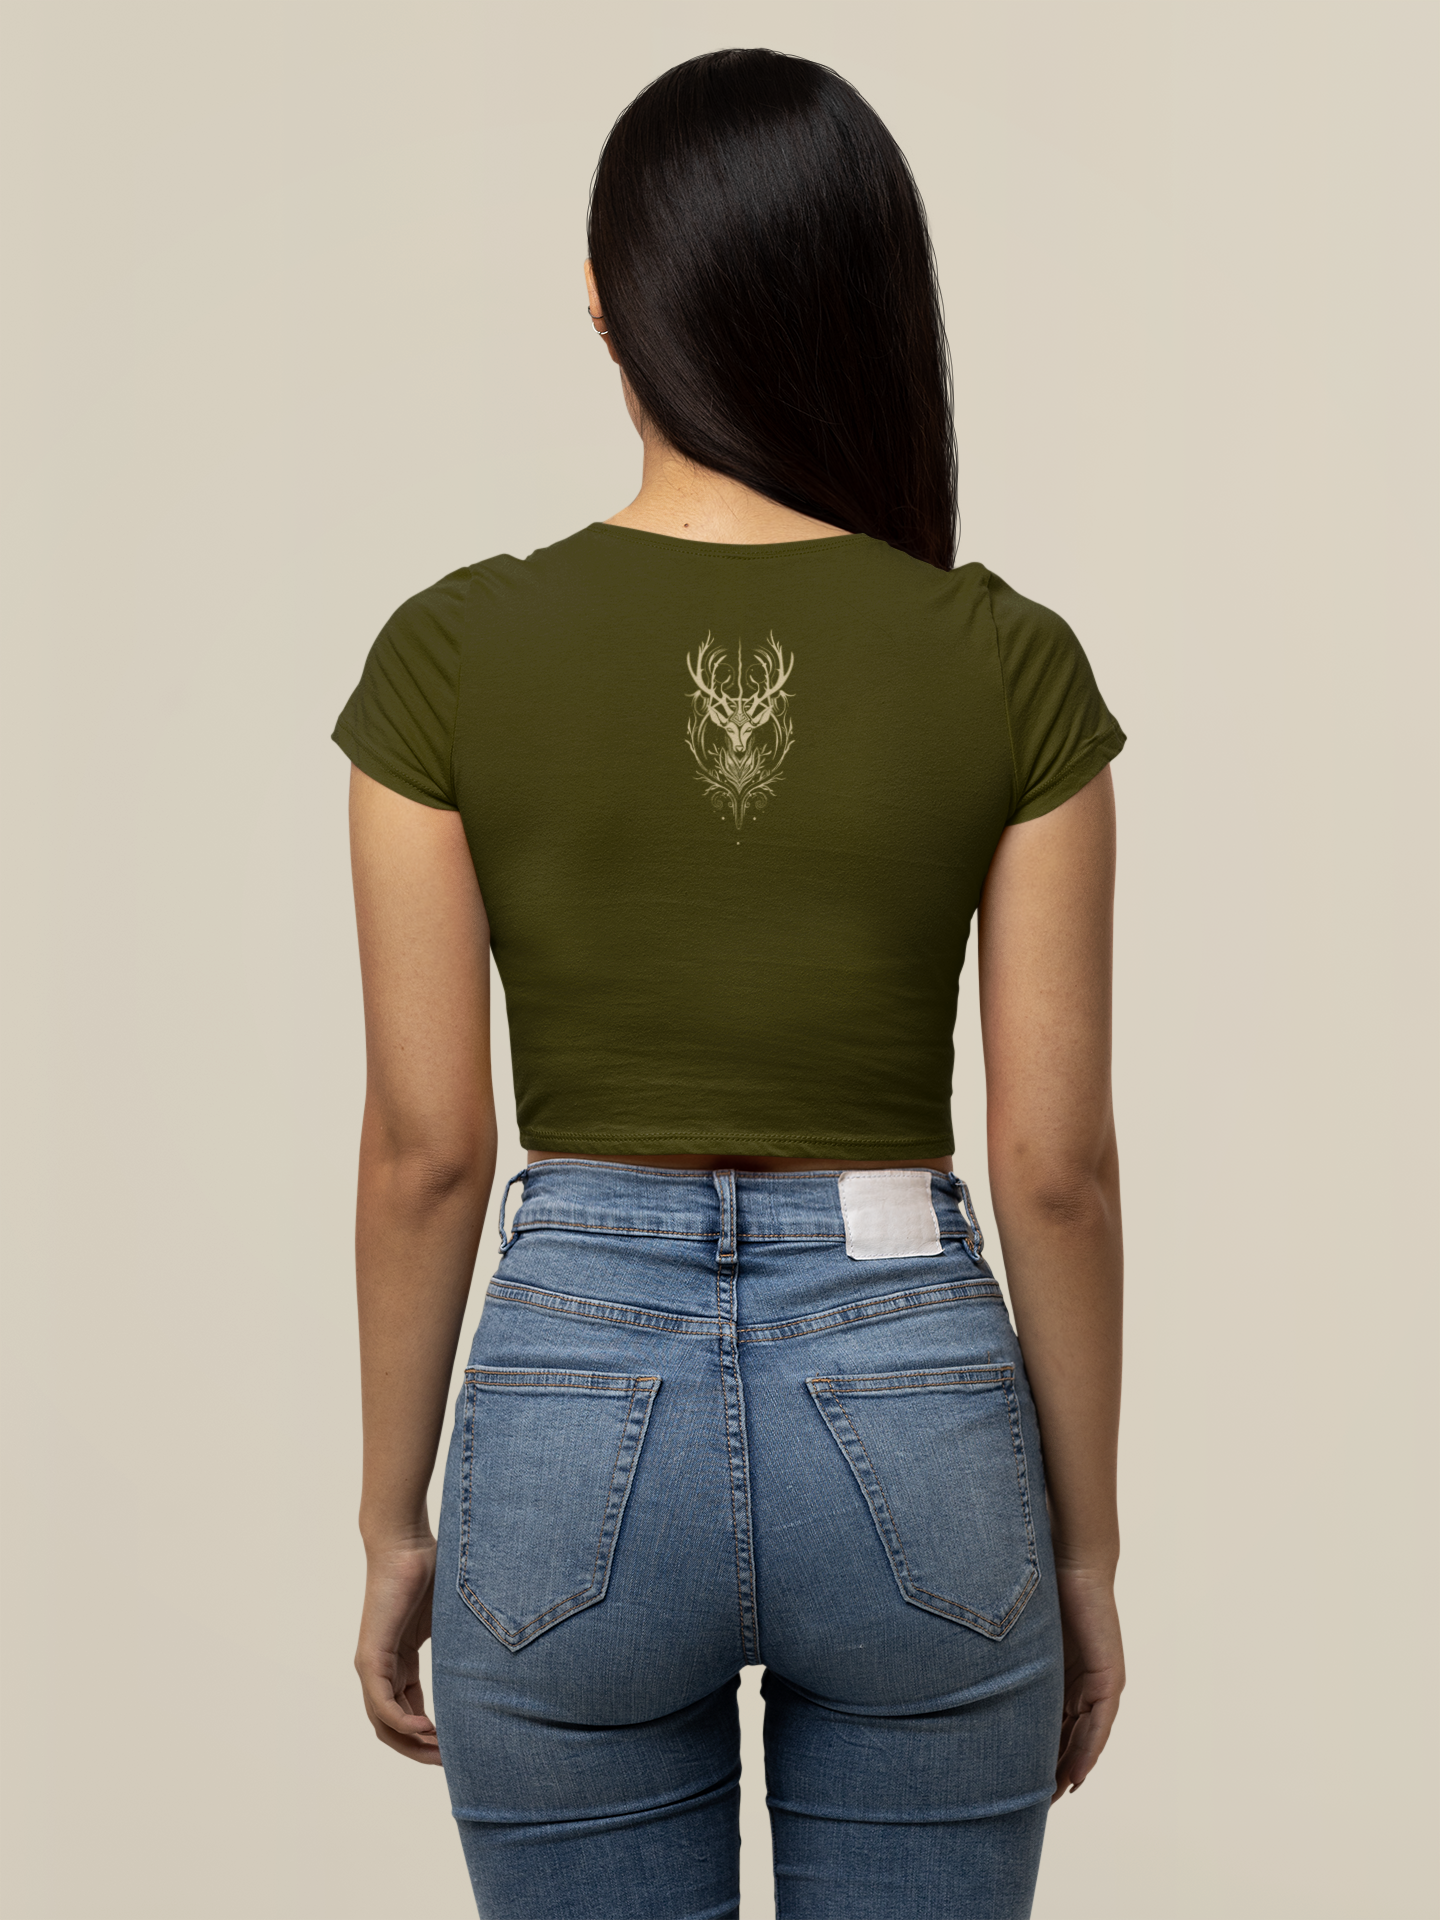 Sorceress Silhouette Top